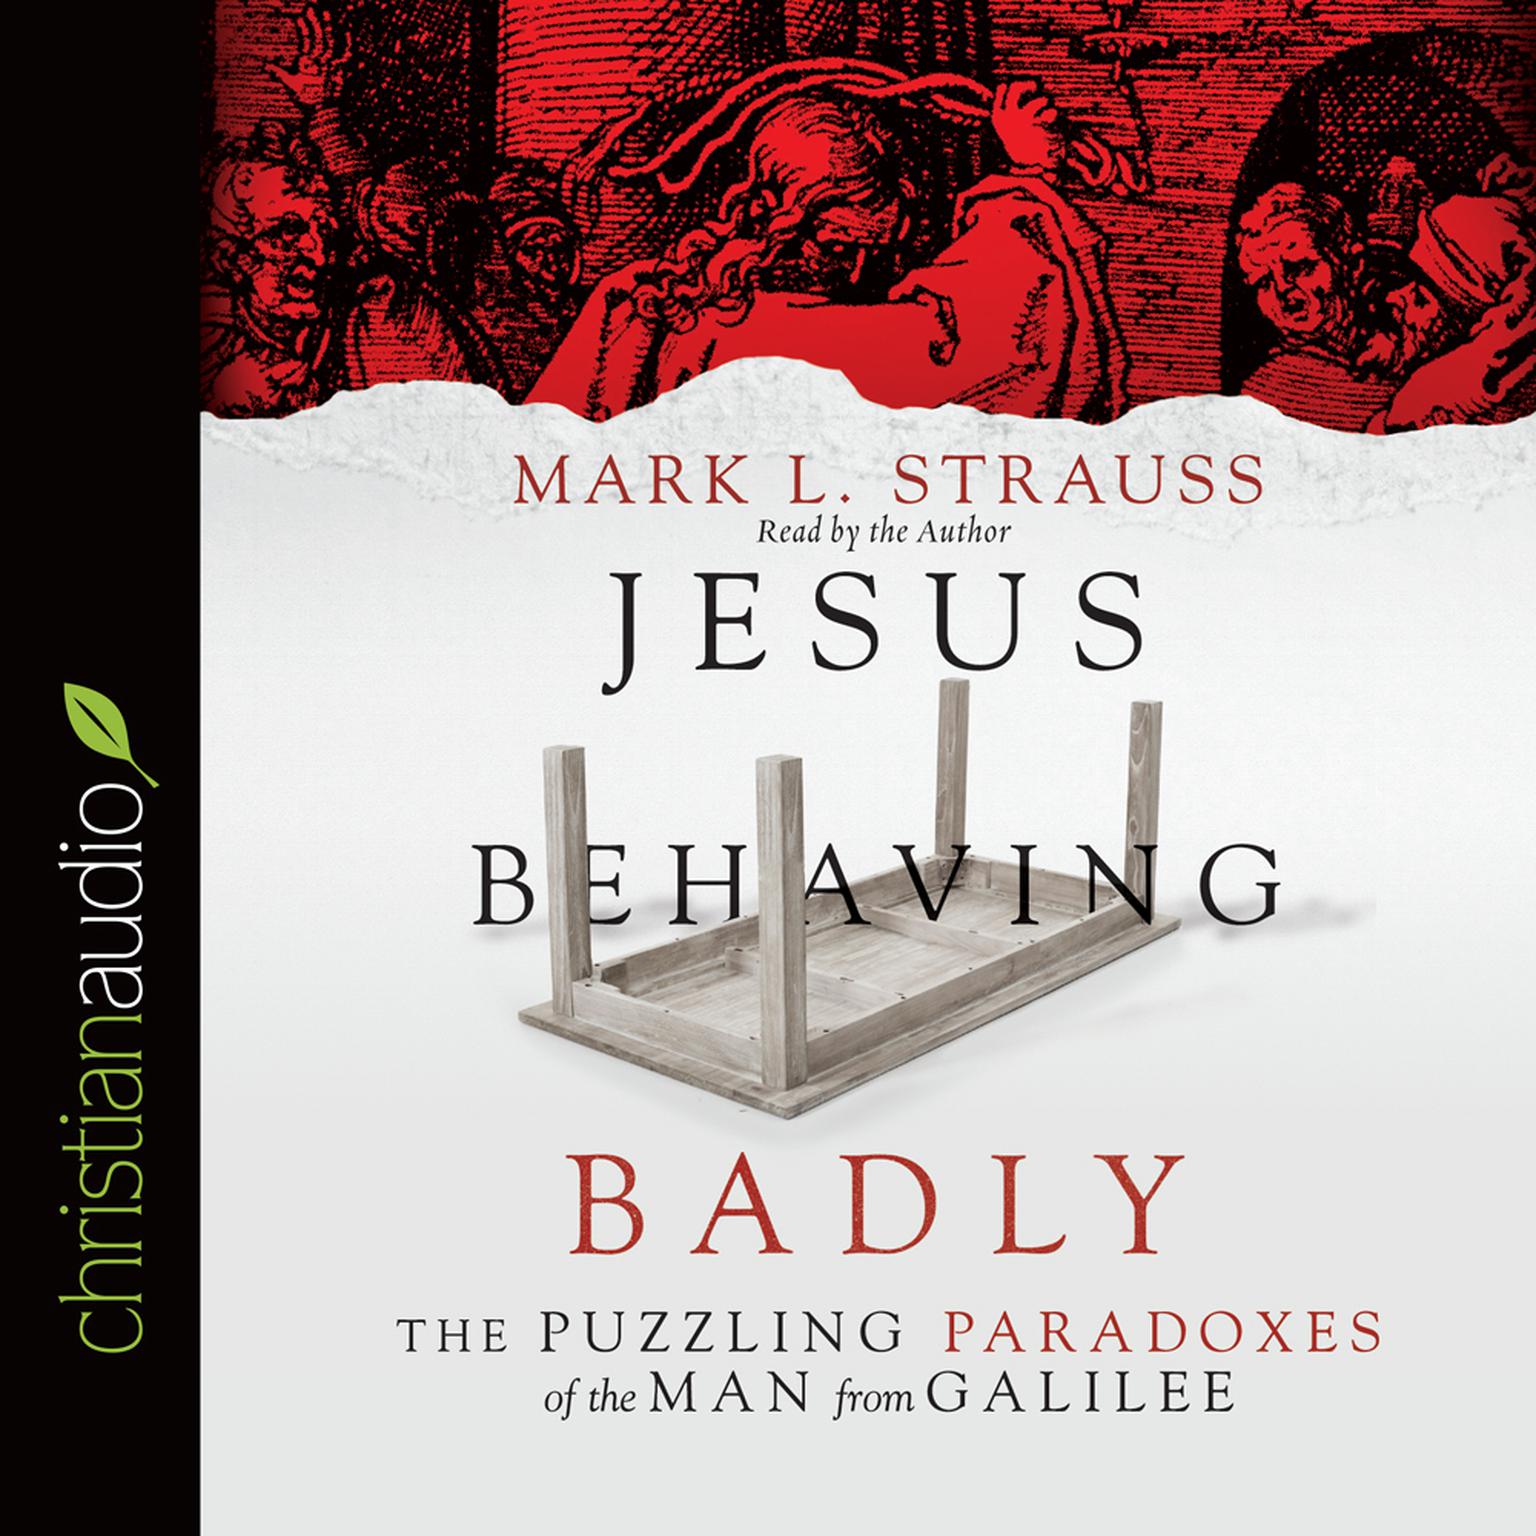 Jesus Behaving Badly: The Puzzling Paradoxes of the Man from Galilee Audiobook, by Mark L. Strauss